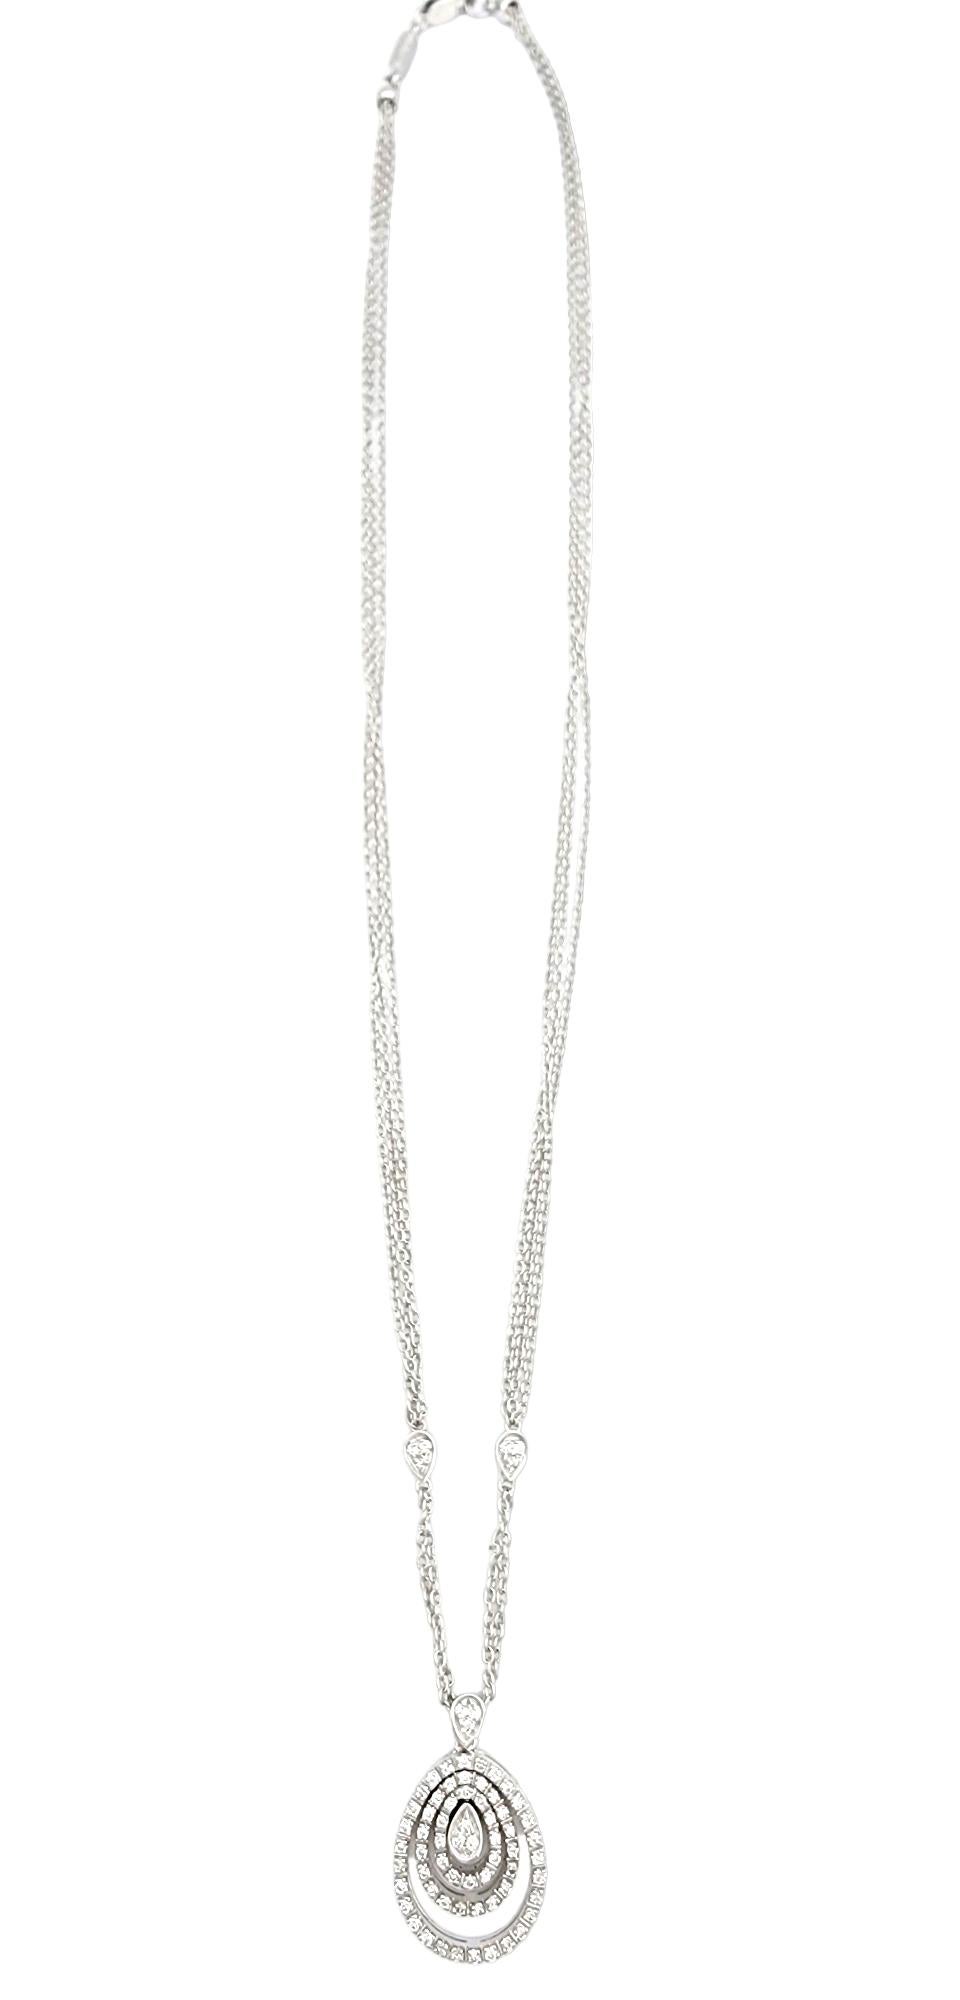 This exquisite Piero Milano triple teardrop halo pendant necklace is a timeless masterpiece crafted in stunning 18-karat white gold. The pendant boasts a mesmerizing design featuring three gracefully layered halos encrusted with brilliant diamonds